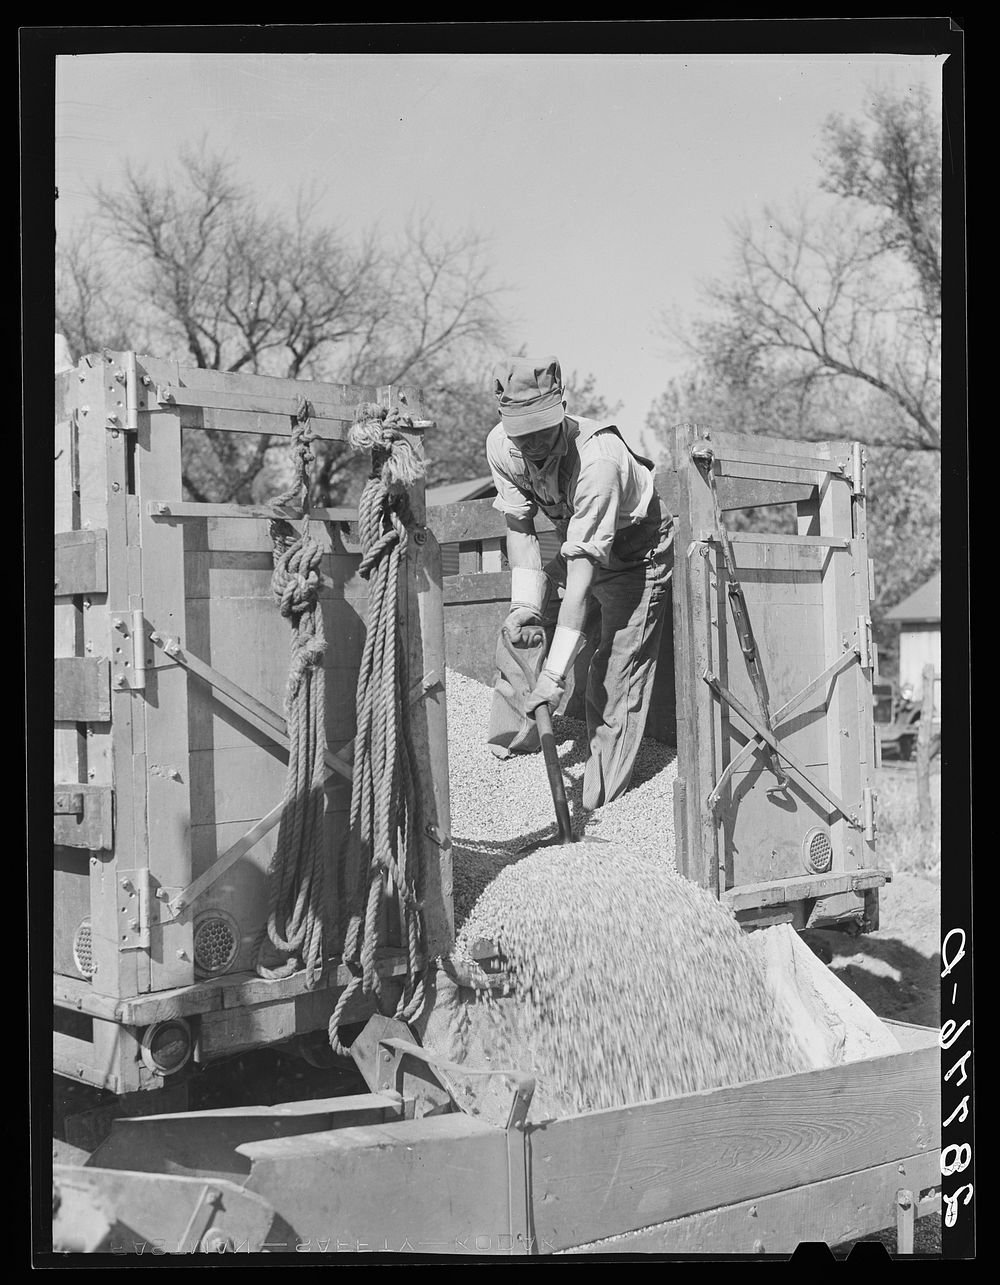 Unloading shelled corn for ever-normal granary storage. Grundy County, Iowa. Sourced from the Library of Congress.